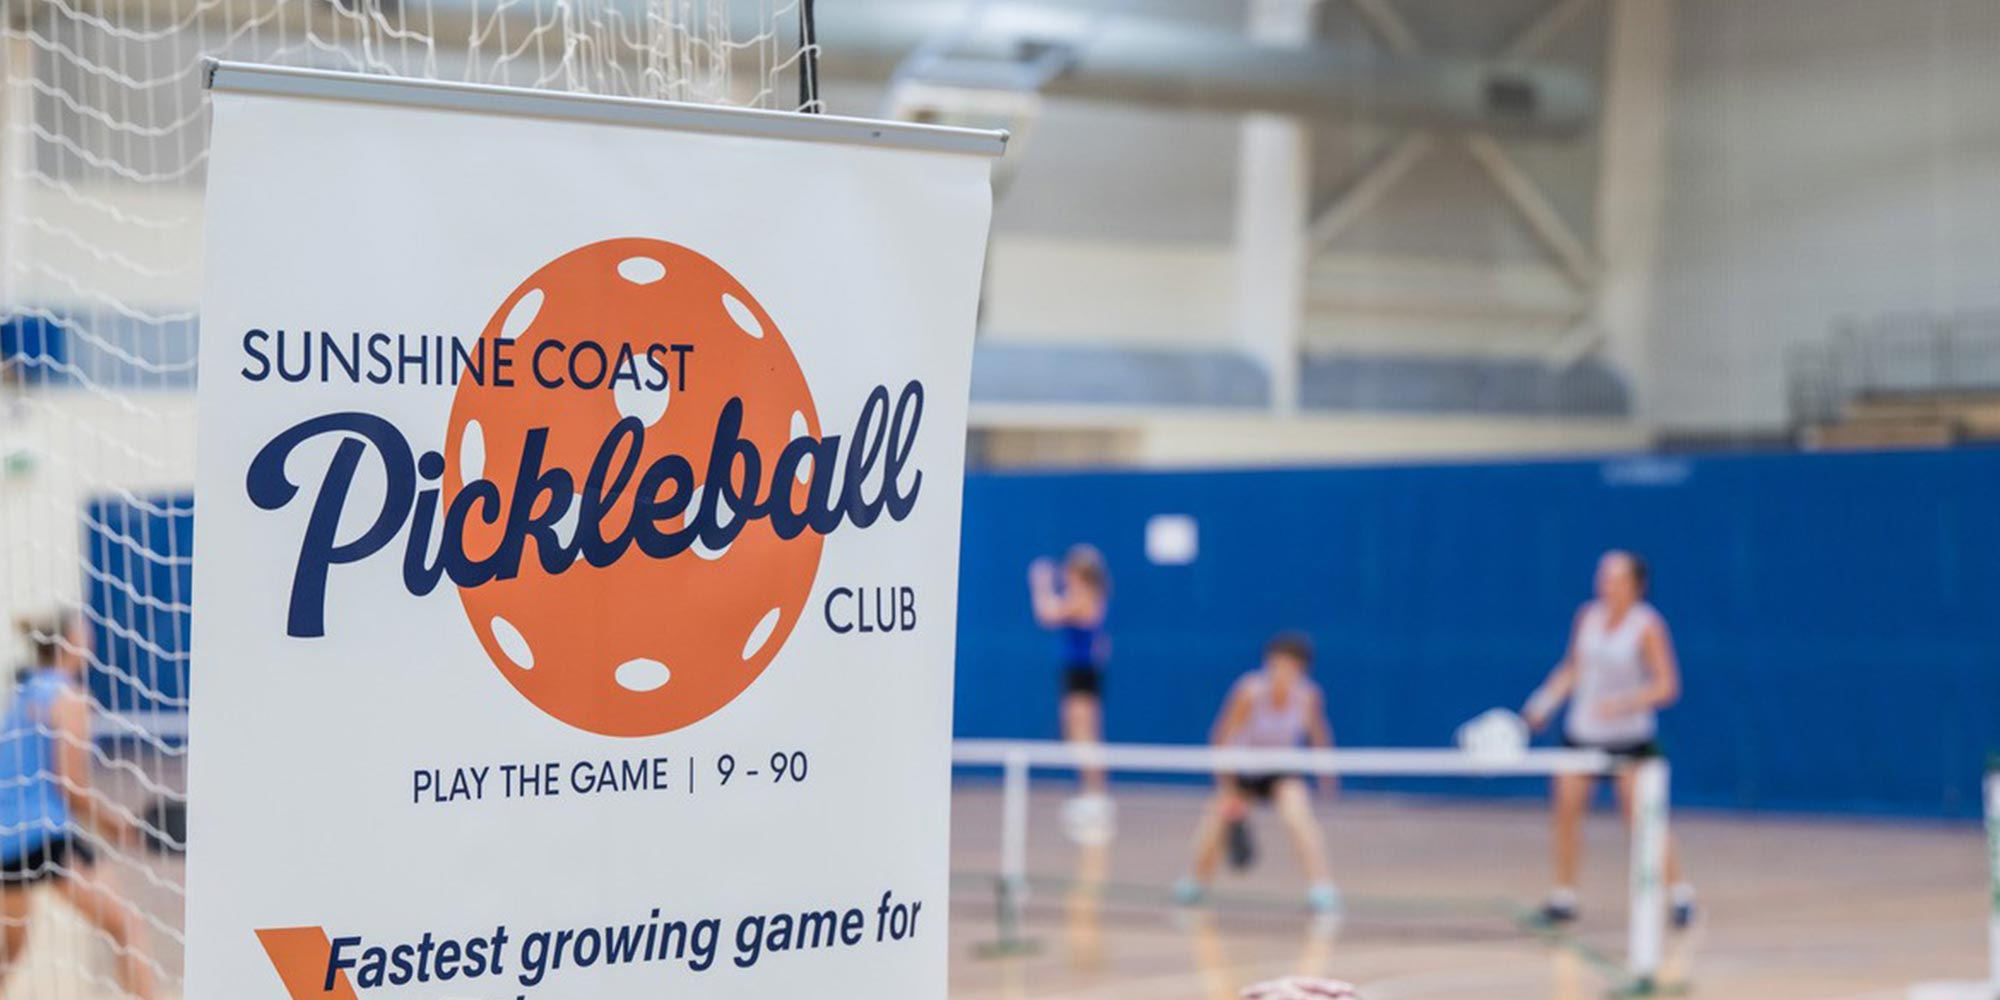 Come and Play Pickleball on the Sunshine Coast